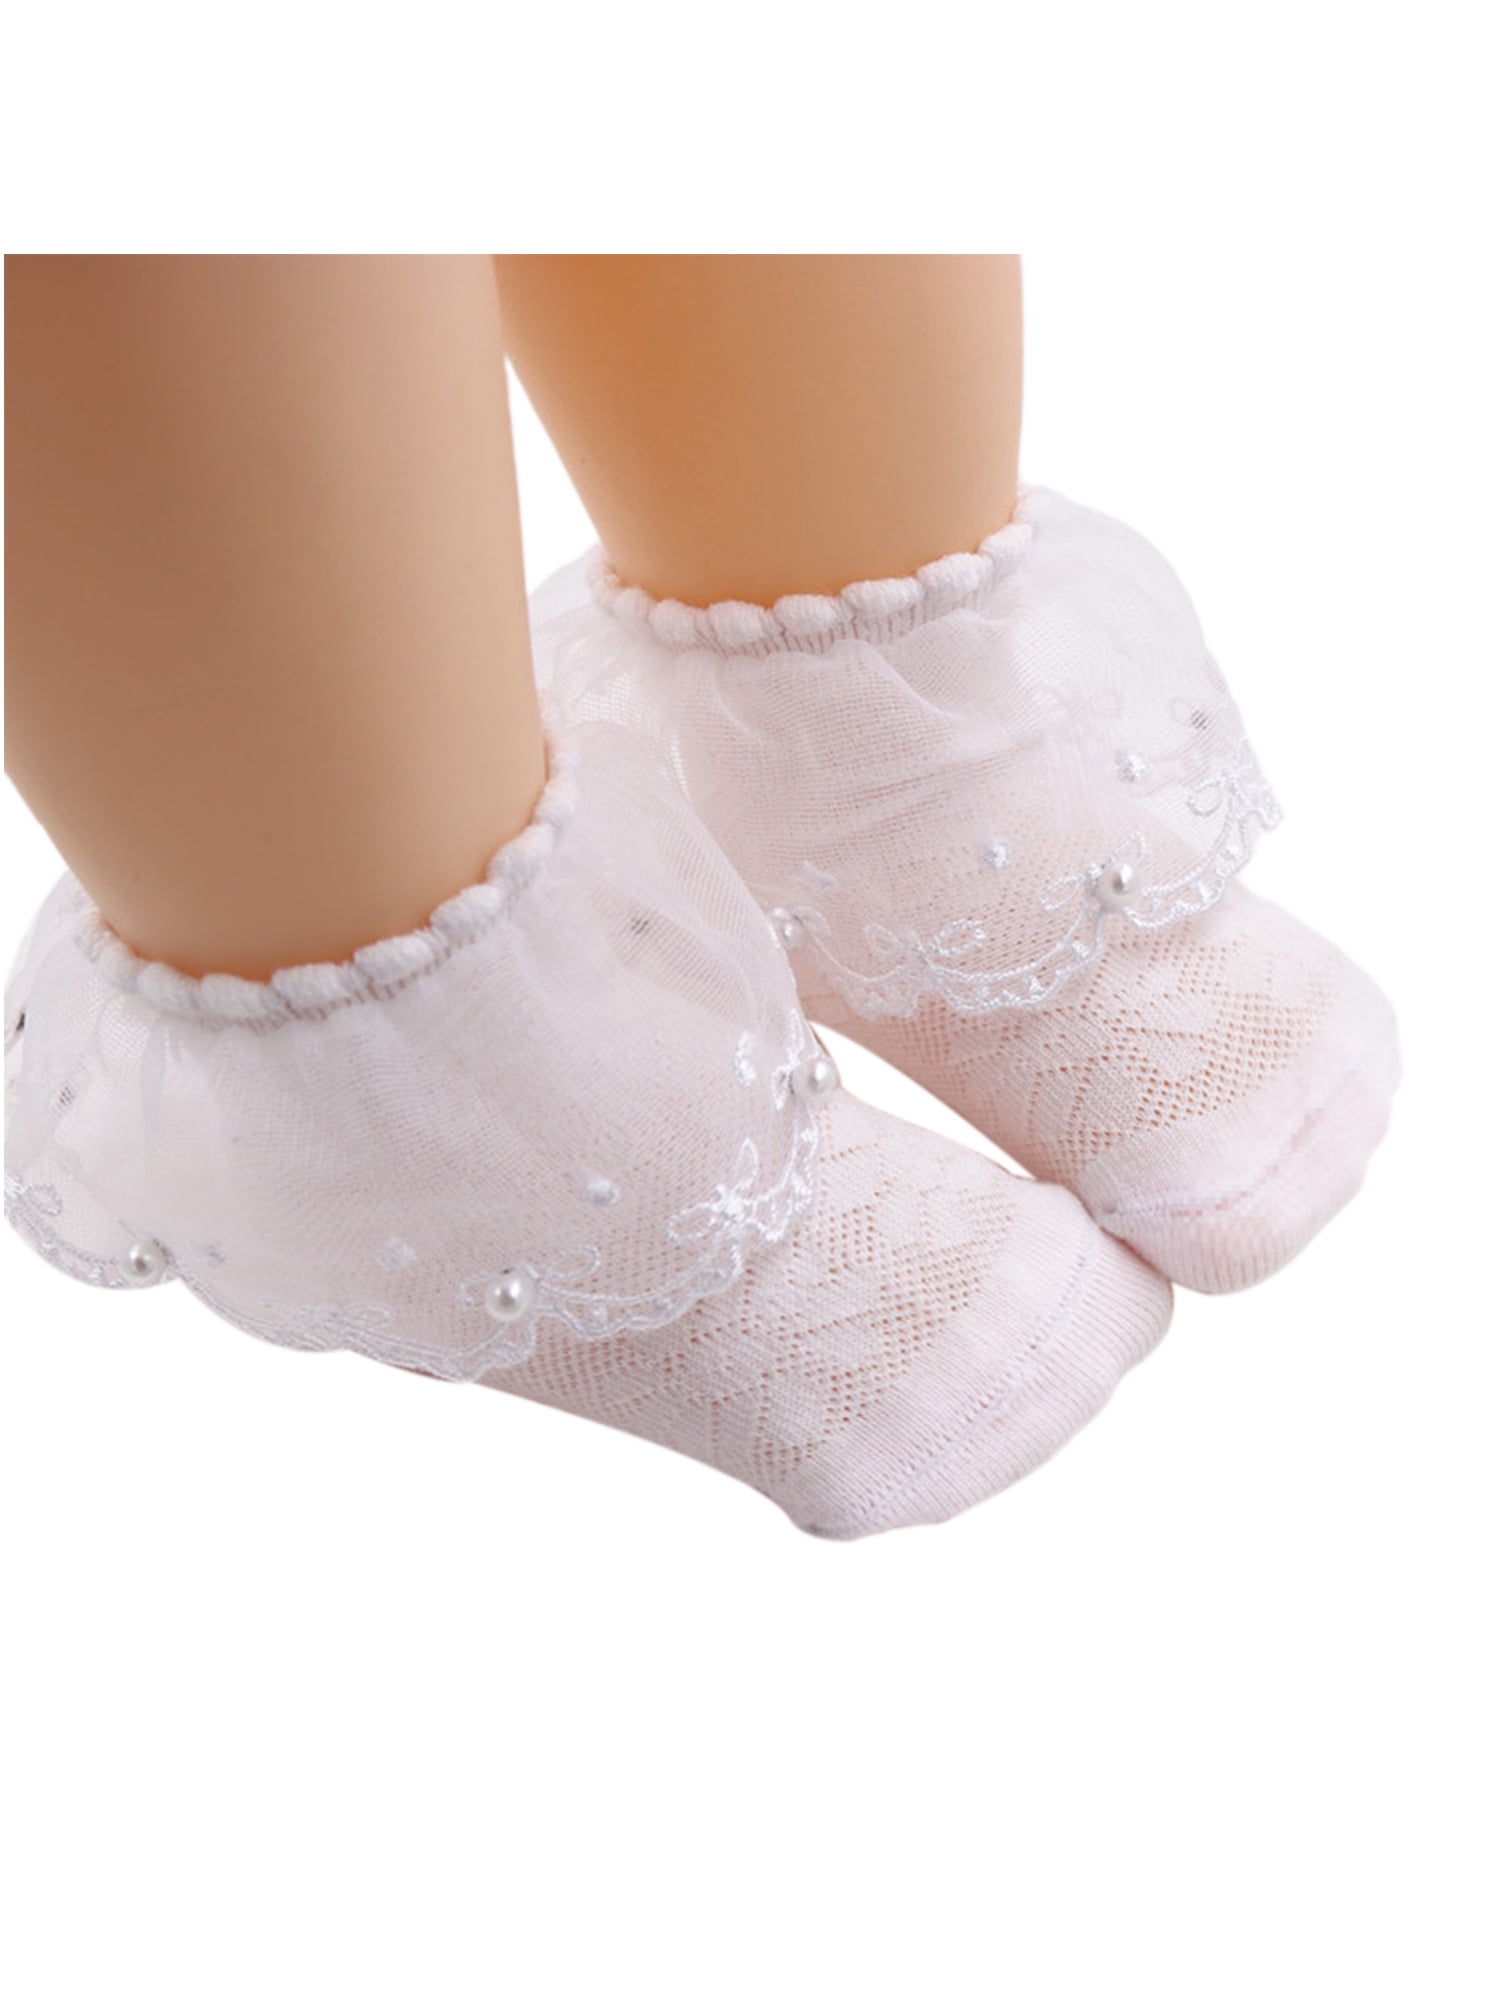 Frilly / Lace Socks Bow and Rose Details, 2 Pack White Baby / Girl